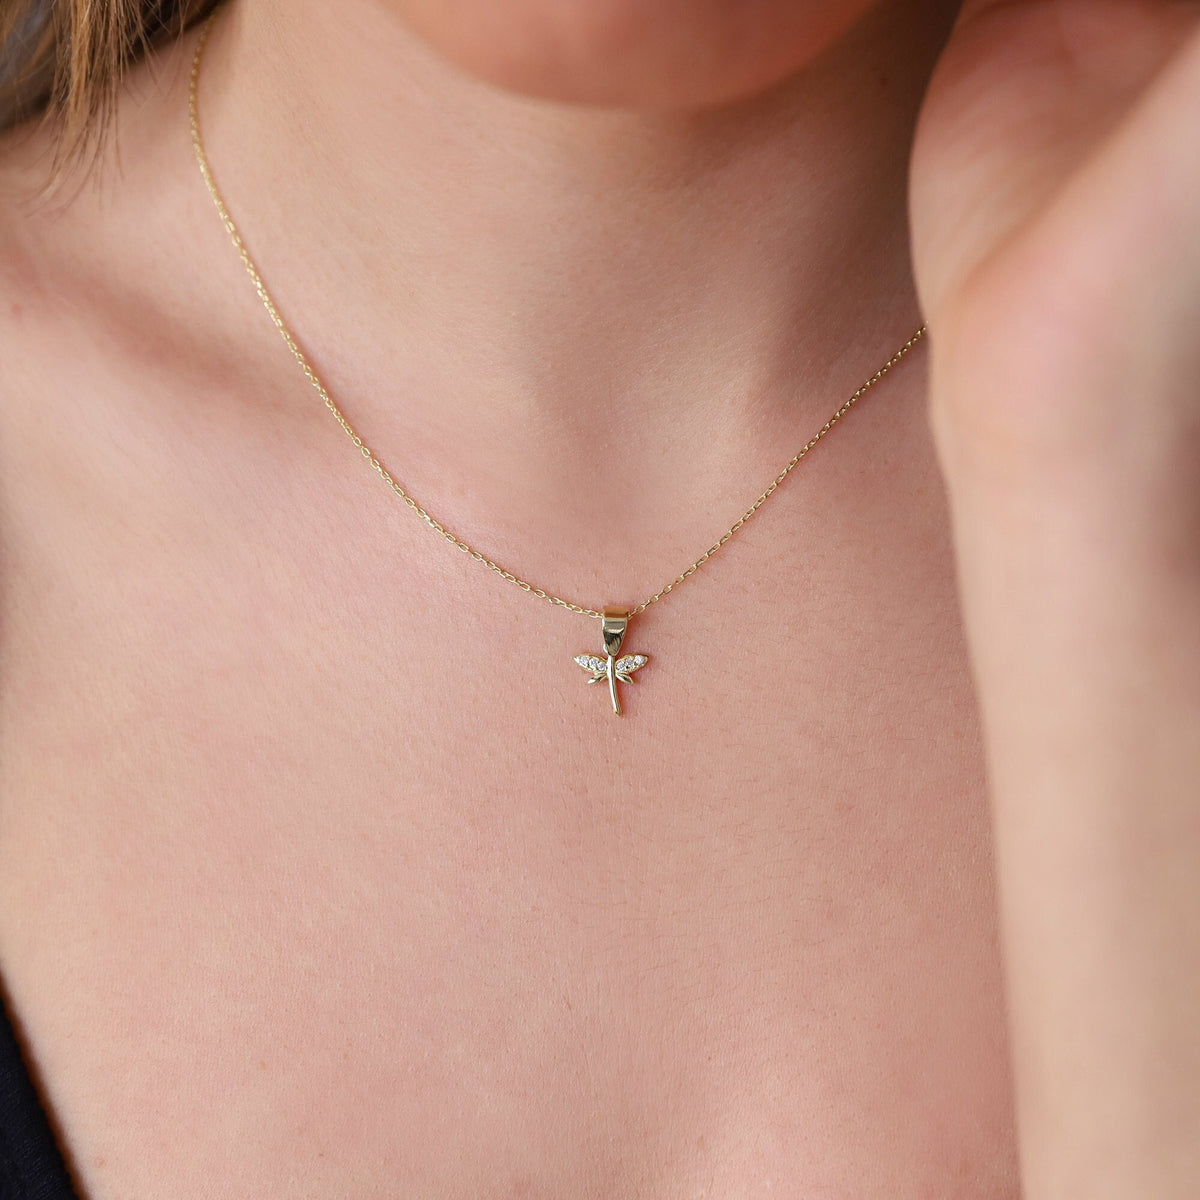 Minimalist CZ Dragonfly Necklace, 14K Gold Dainty Pendant • Simple Gold Filled Fairytale Charm Necklace • Silver Birthday Gift for Women